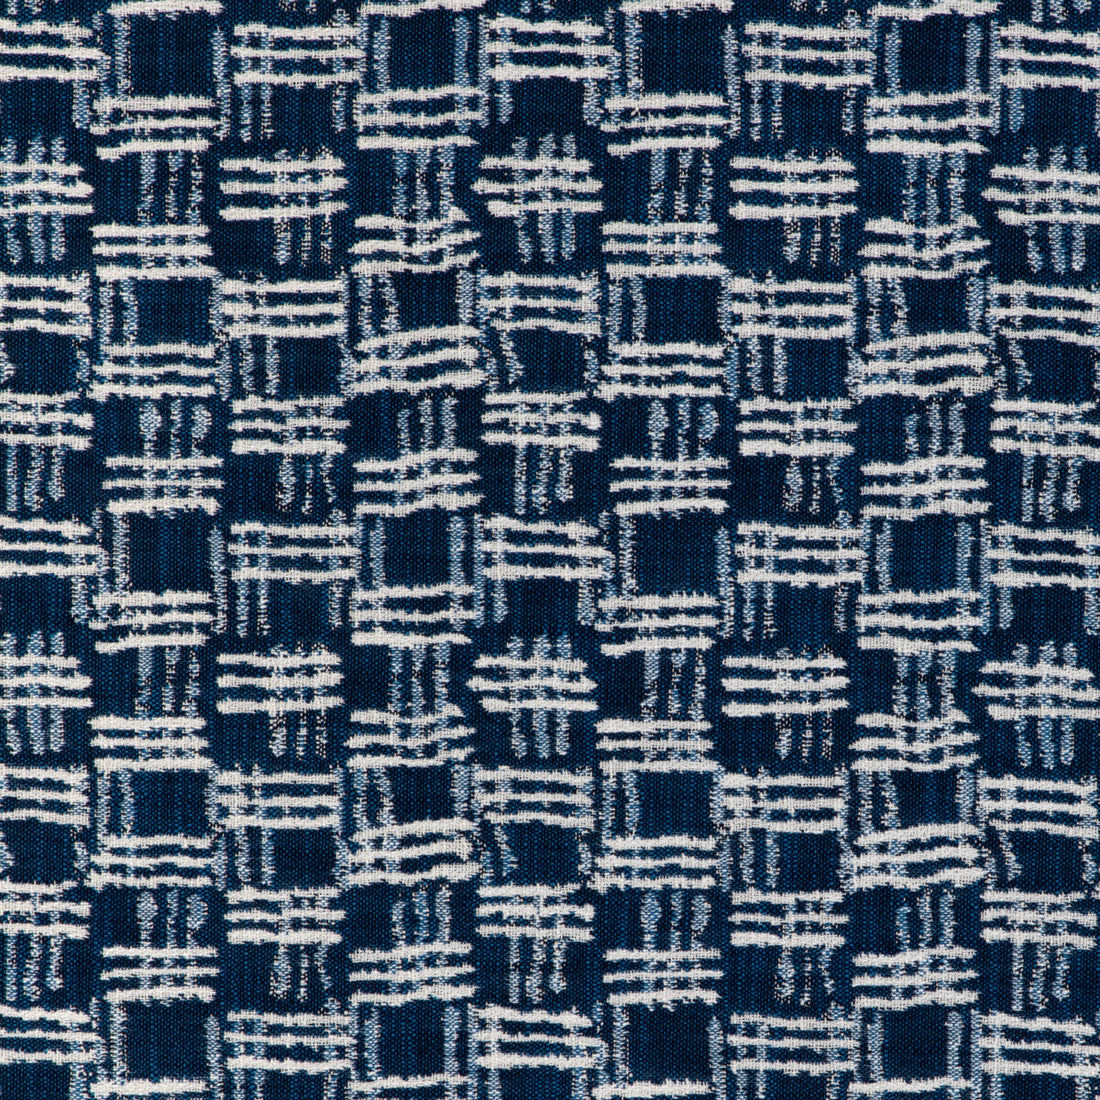 Cross Waves fabric in marine color - pattern 36928.51.0 - by Kravet Couture in the Riviera collection